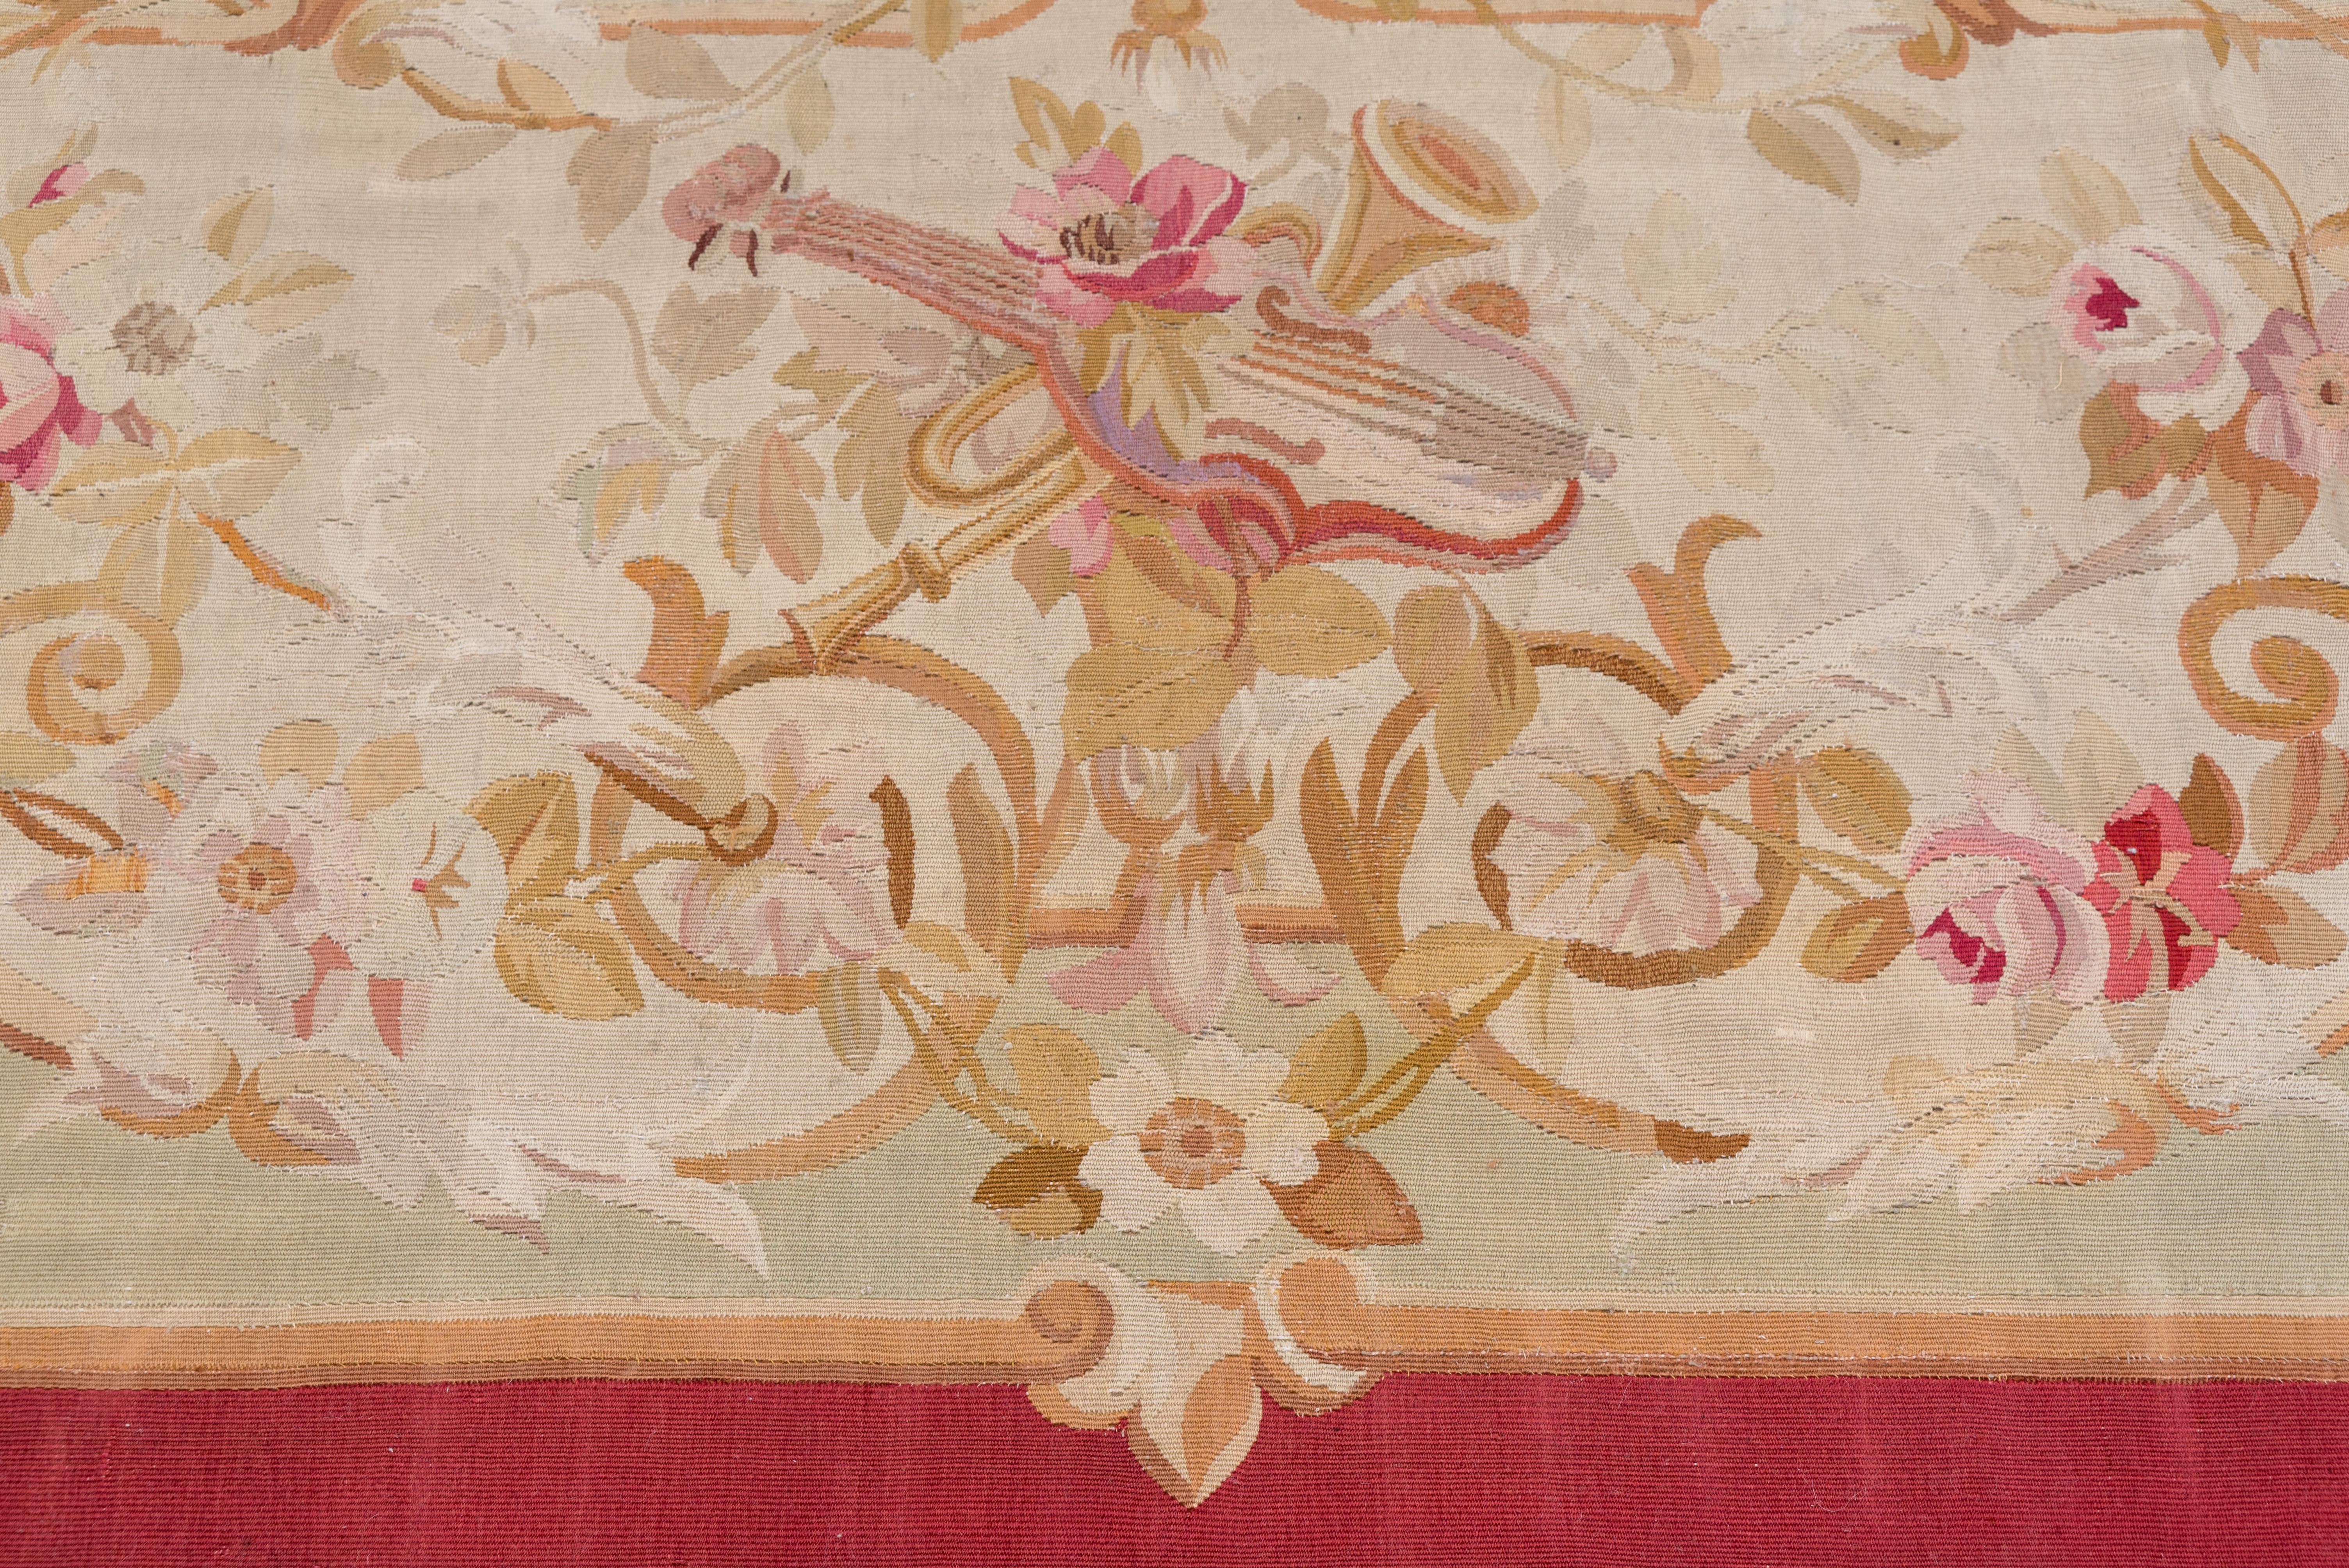 This French tapestry-weave pile less carpet shows a pinched, oval cartouche ecru medallion with a central bouquet, on a flower accented beige field. The corner-shaped plain brown border frames the whole.